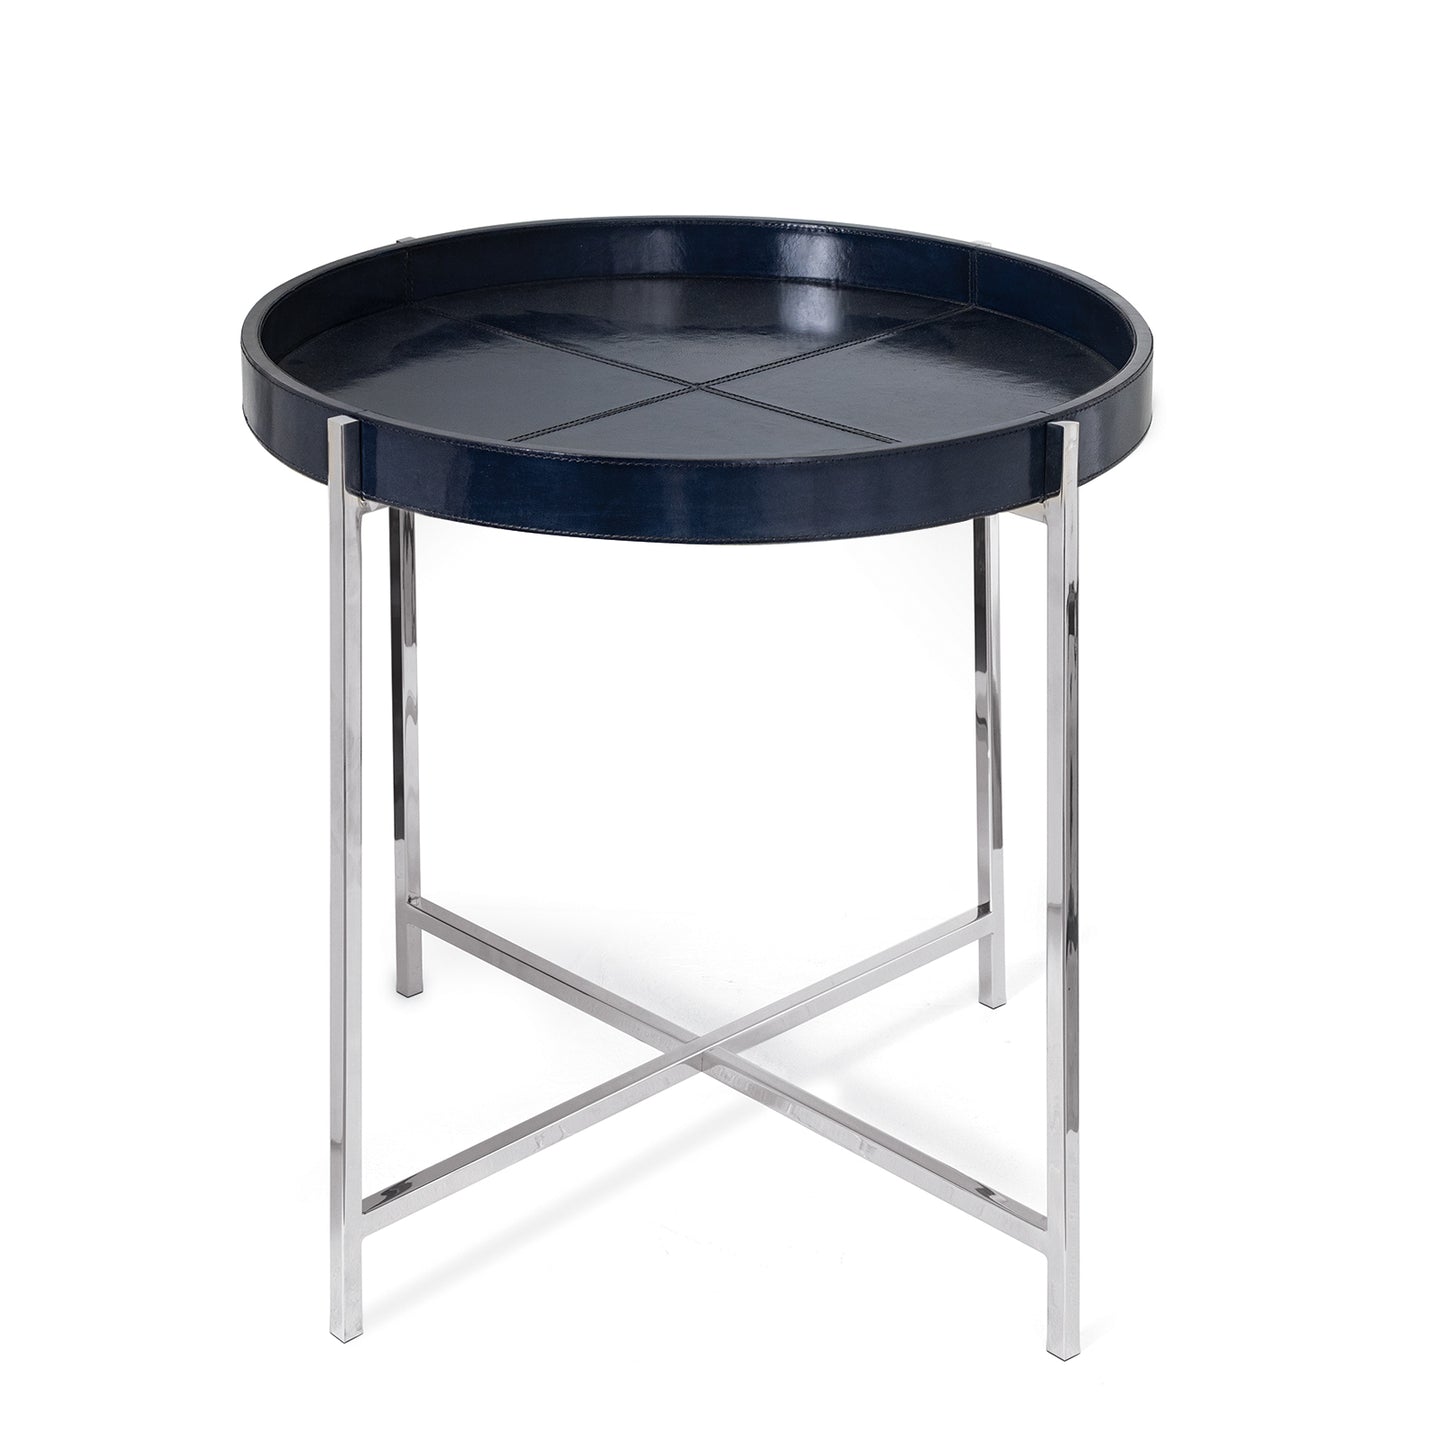 Derby Leather Tray Table in Blue by Regina Andrew